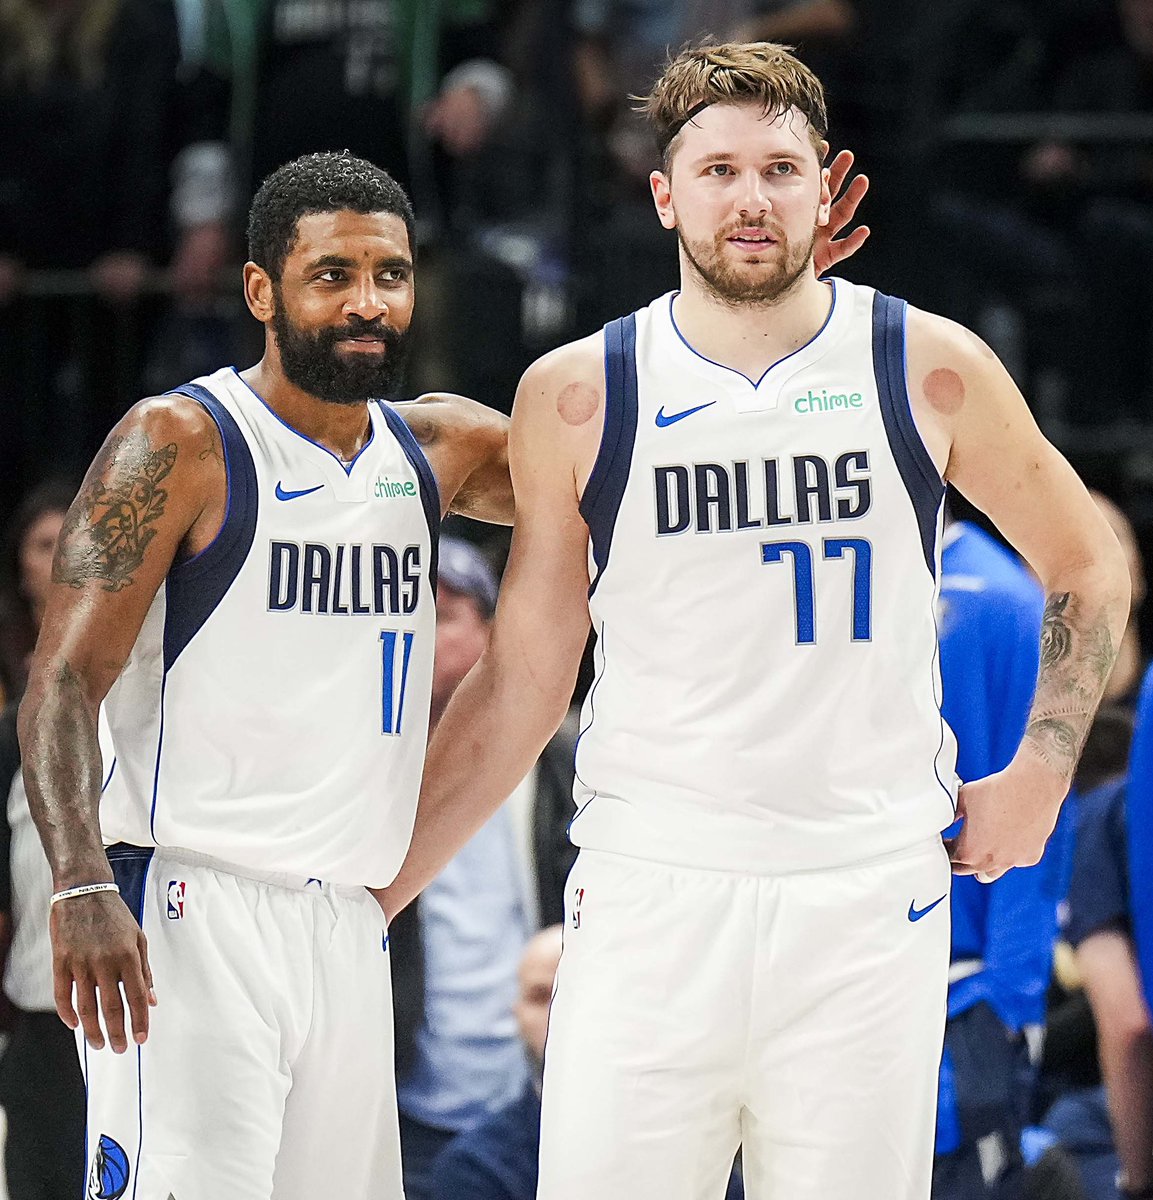 Kyrie Irving on the interaction between the OKC fans and Luka Doncic: “Luka was very nonchalant about it like he was very cool about it, and for a fan to do that, then that's my time to step in as a teammate and be like, what the f*ck?” Kai stepping up for his lil bro ❤️